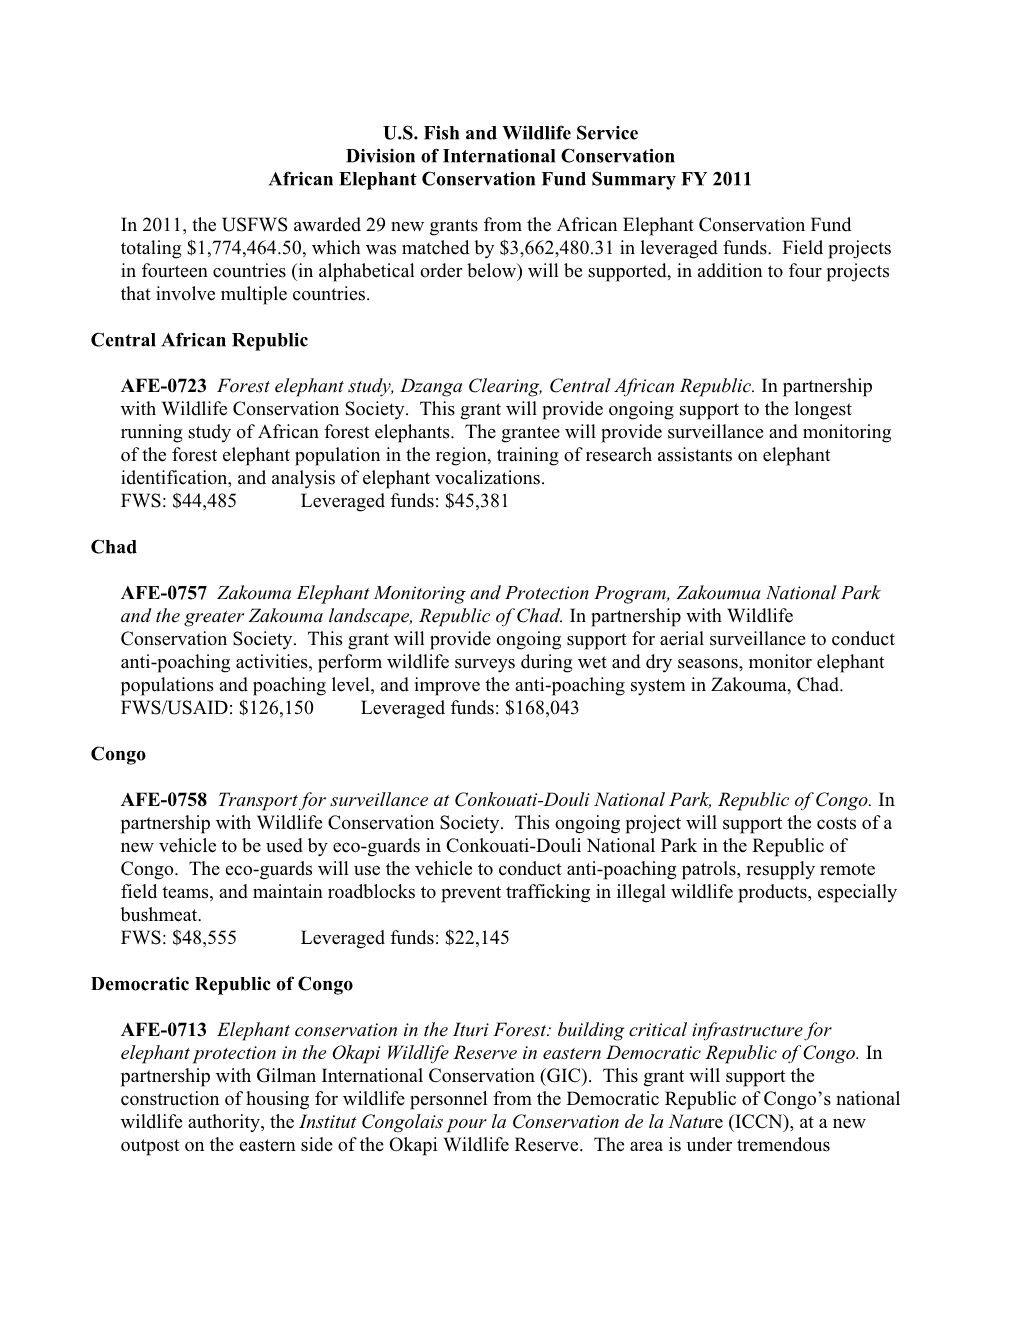 U.S. Fish and Wildlife Service Division of International Conservation African Elephant Conservation Fund Summary FY 2011